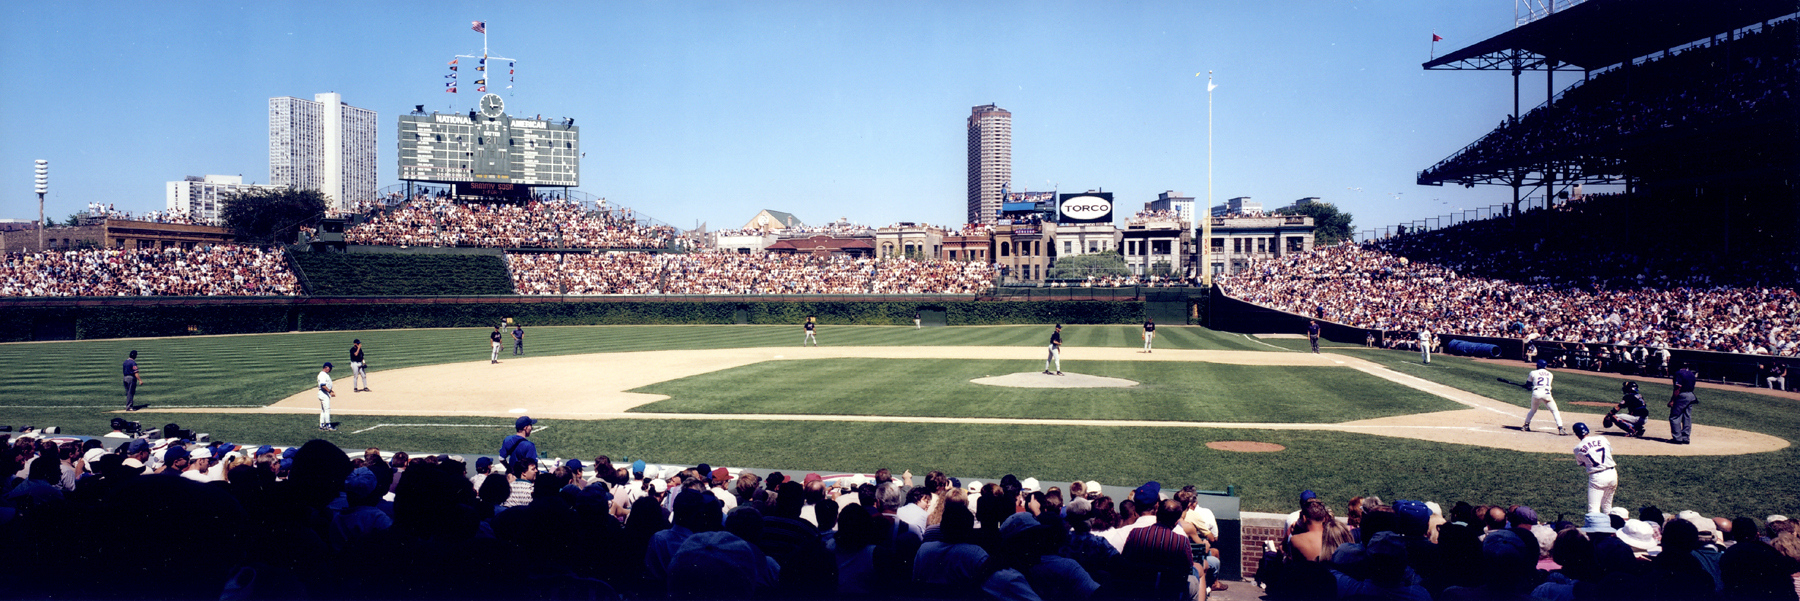 Chicago Cubs Wallpaper Of Wrigley Field Panorama Day Game